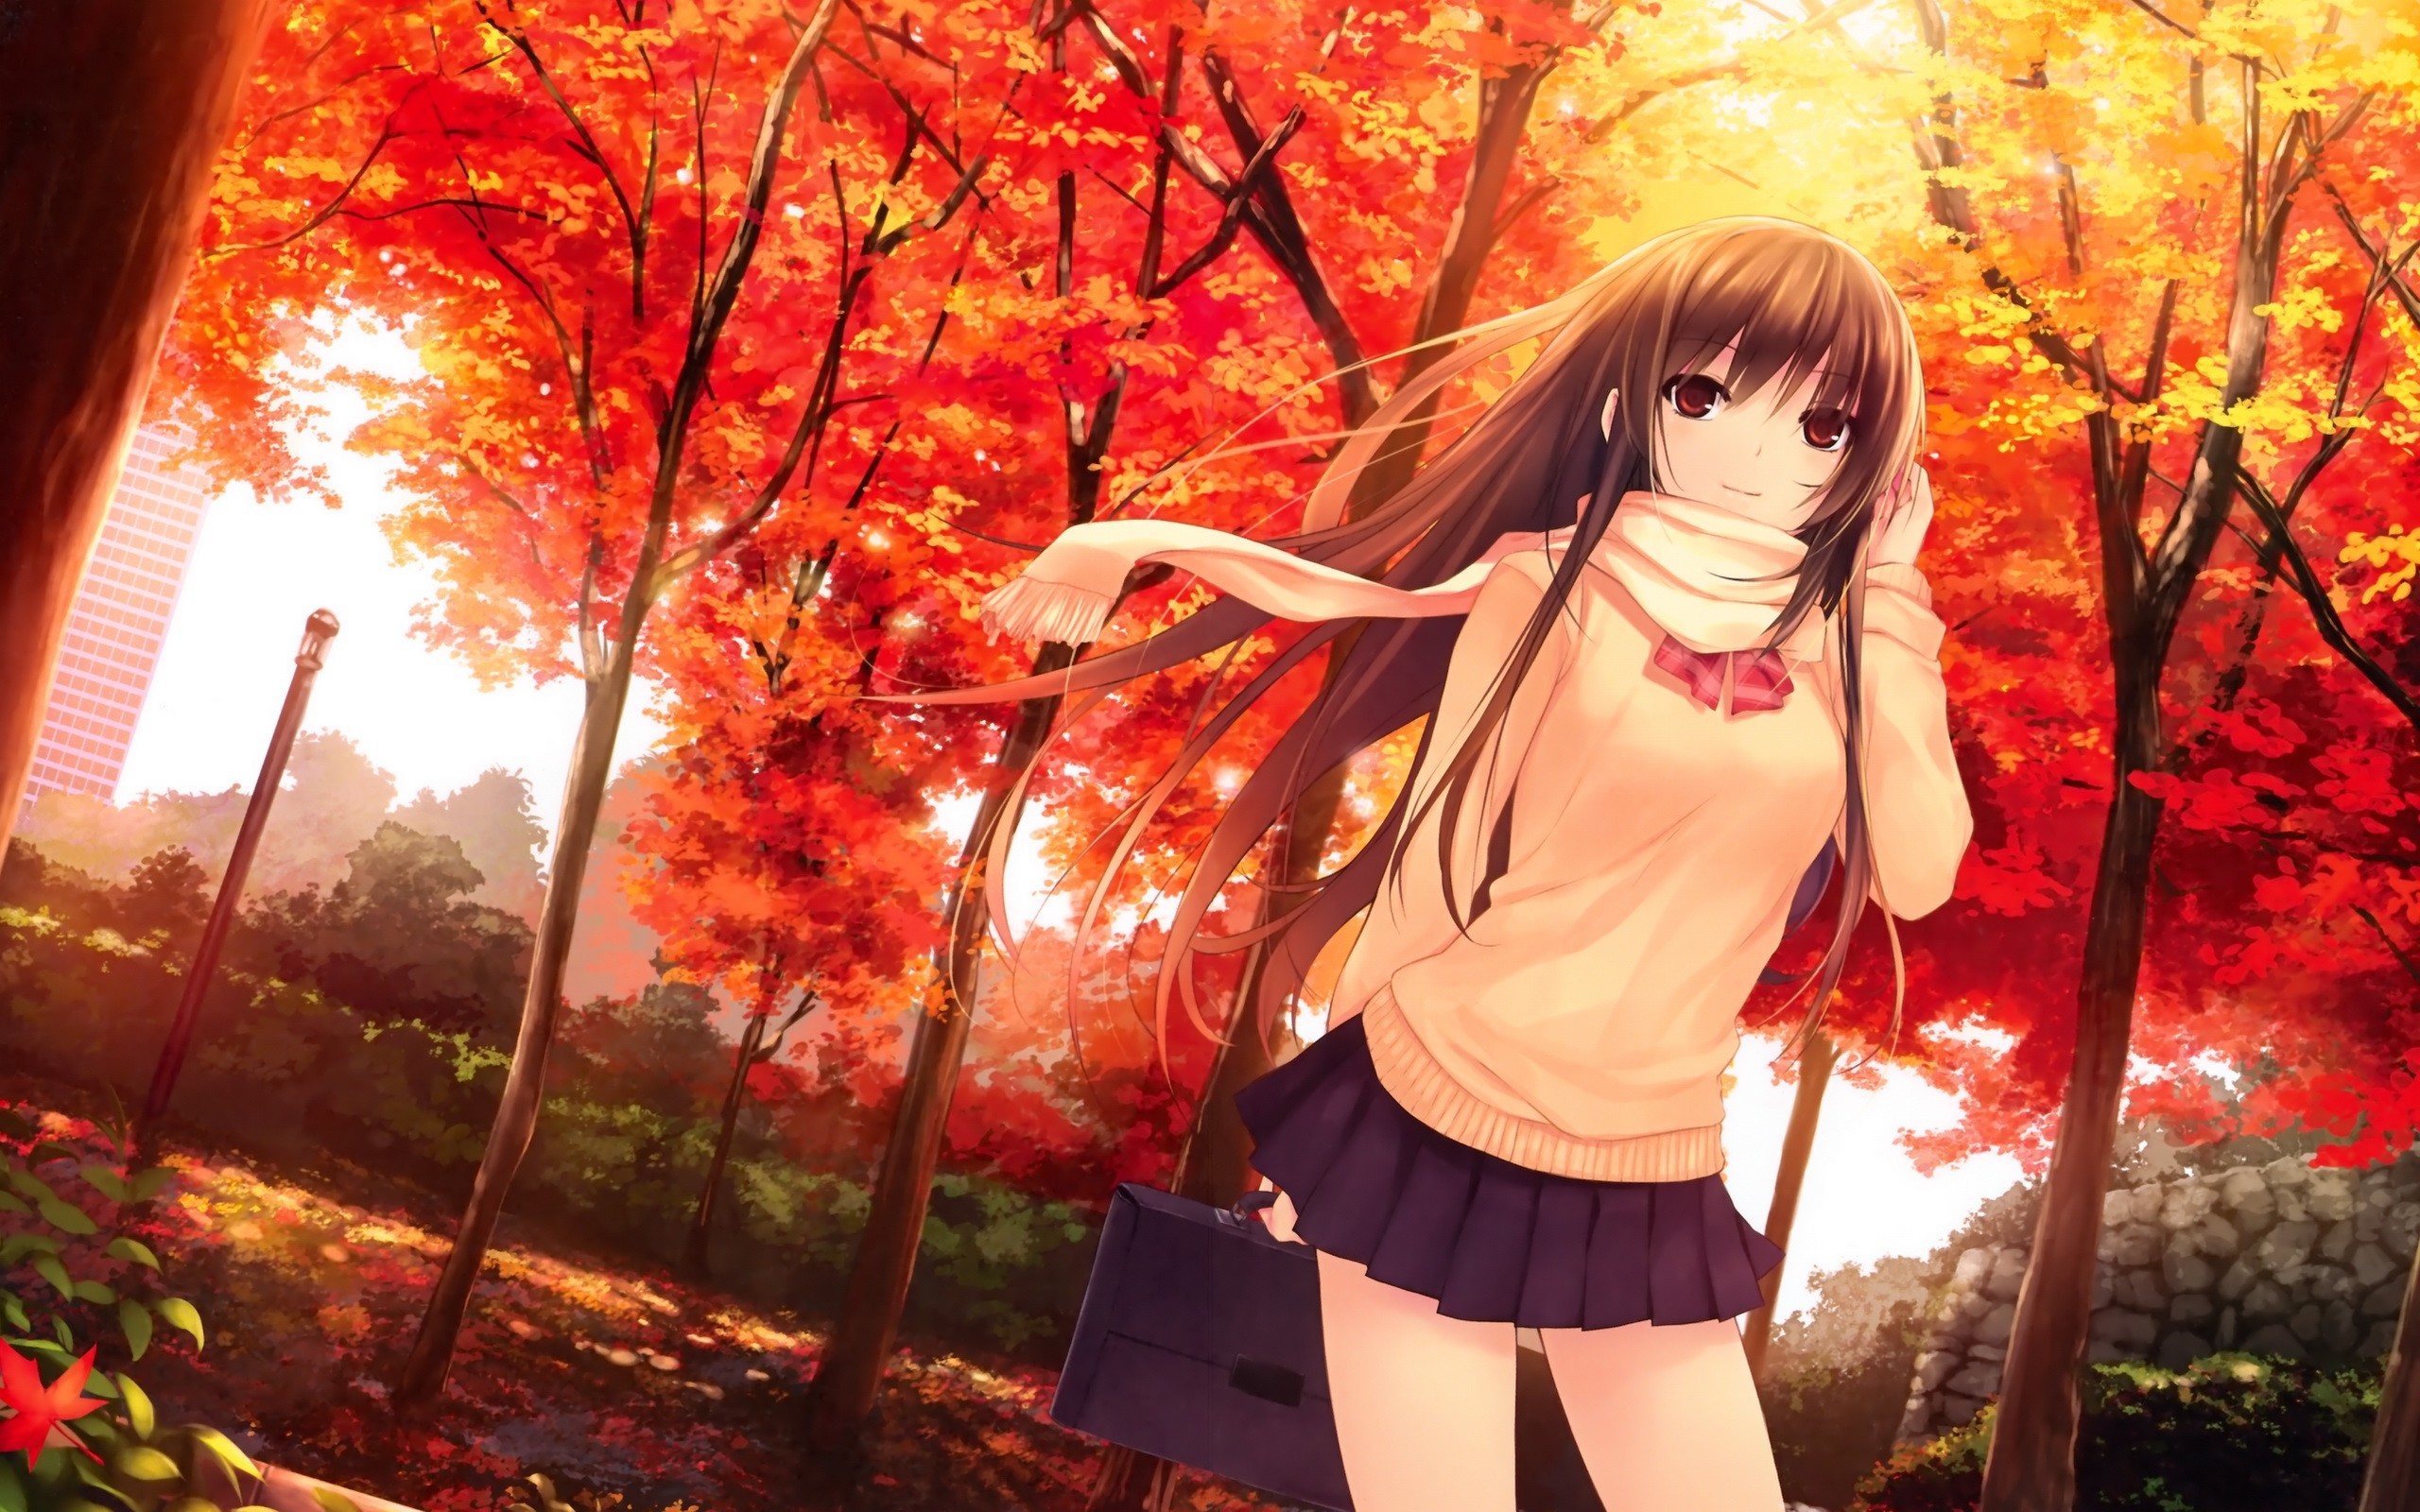 Anime Autumn Leaves Wallpapers - Wallpaper Cave